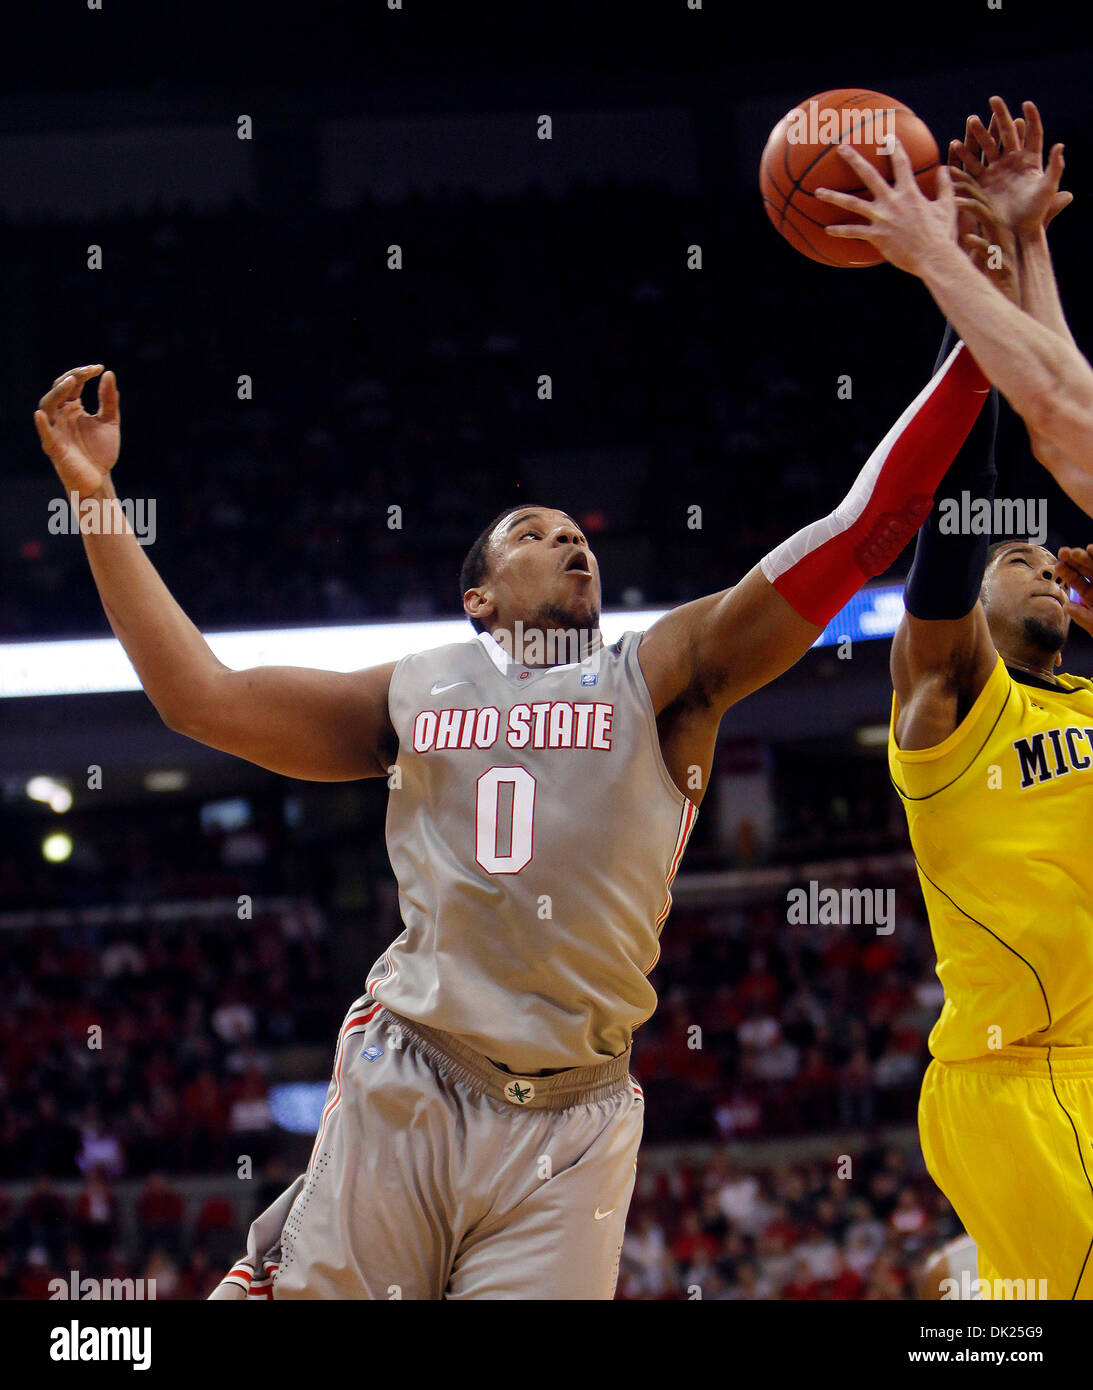 Feb 03, 2011 - Columbus, Ohio, U.S. - NCAA Basketball - Ohio State's JARED SULLINGER (0) grabs a rebound over Michigan's DARIUS MORRIS, right, during the first half of an NCAA college basketball game Thursday, Feb 3, 2011, in Columbus, Ohio. Ohio State won 62-53. (Photo/Terry Gilliam) (Credit Image: © Terry Gilliam/ZUMAPRESS.com) Stock Photo